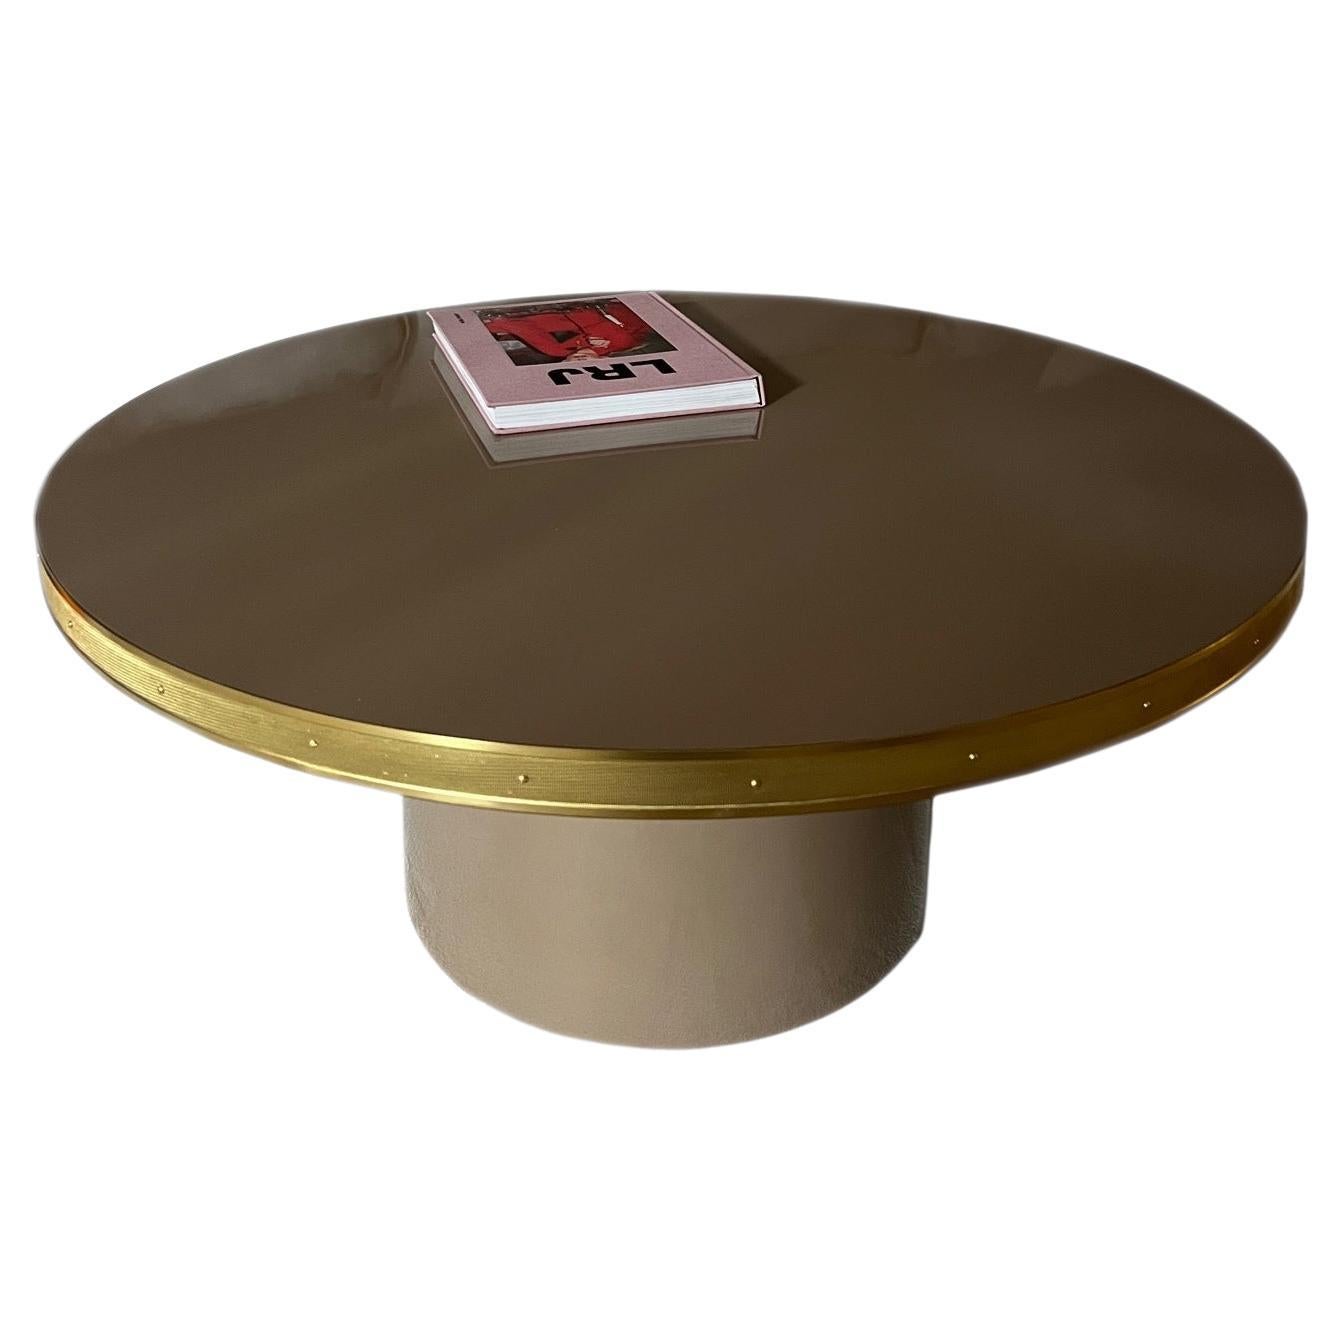 Coffee Table High Gloss Laminated Top Brass Tape Framed Black Pedestal Base M For Sale